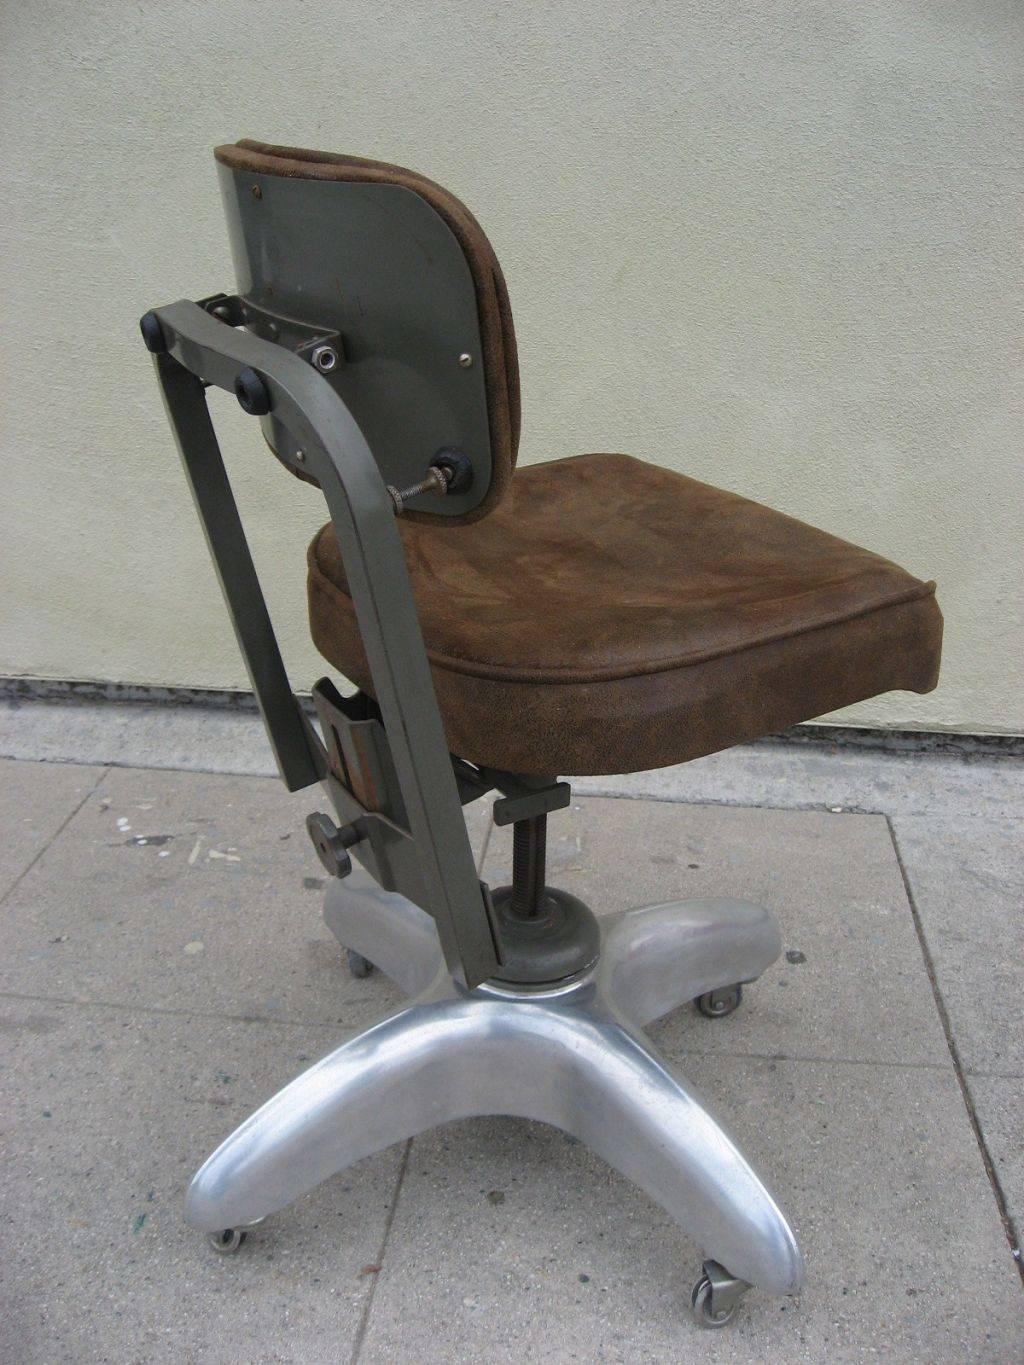 Cast aluminium base swivel chair. The back and seat are adjustable. It has new upholstery in brown ultrasuede. Wheels were missing. So the four have been changed.